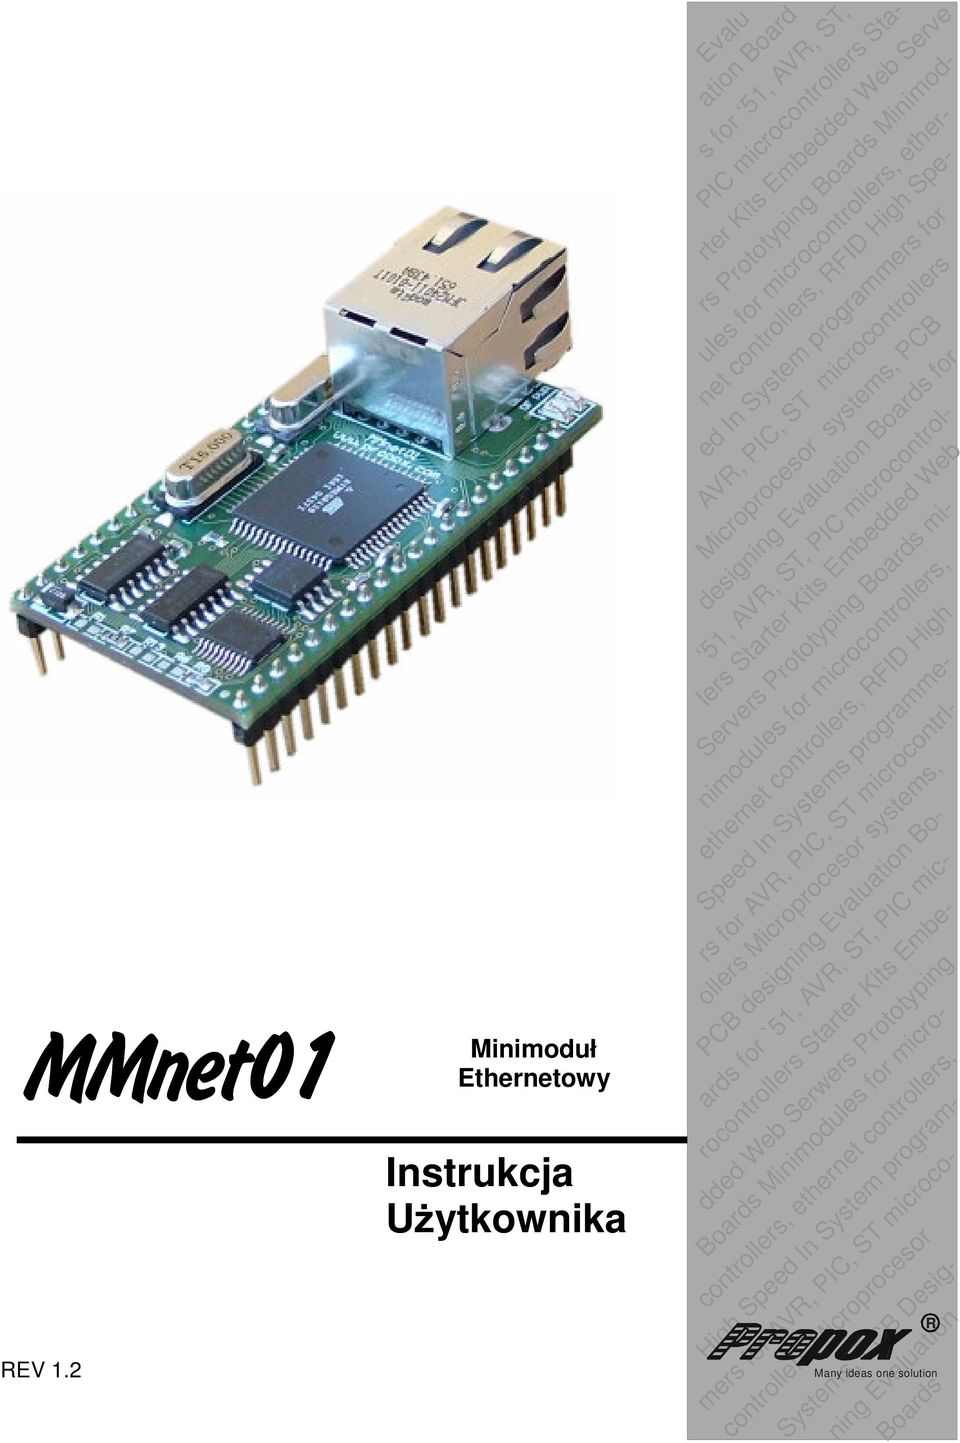 Embedded Web Servers Prototyping Boards mi- nimodules for microcontrollers, ethernet controllers, RFID High Speed In Systems programme- rs for AVR, PIC, ST microcontrlollers Microprocesor systems,